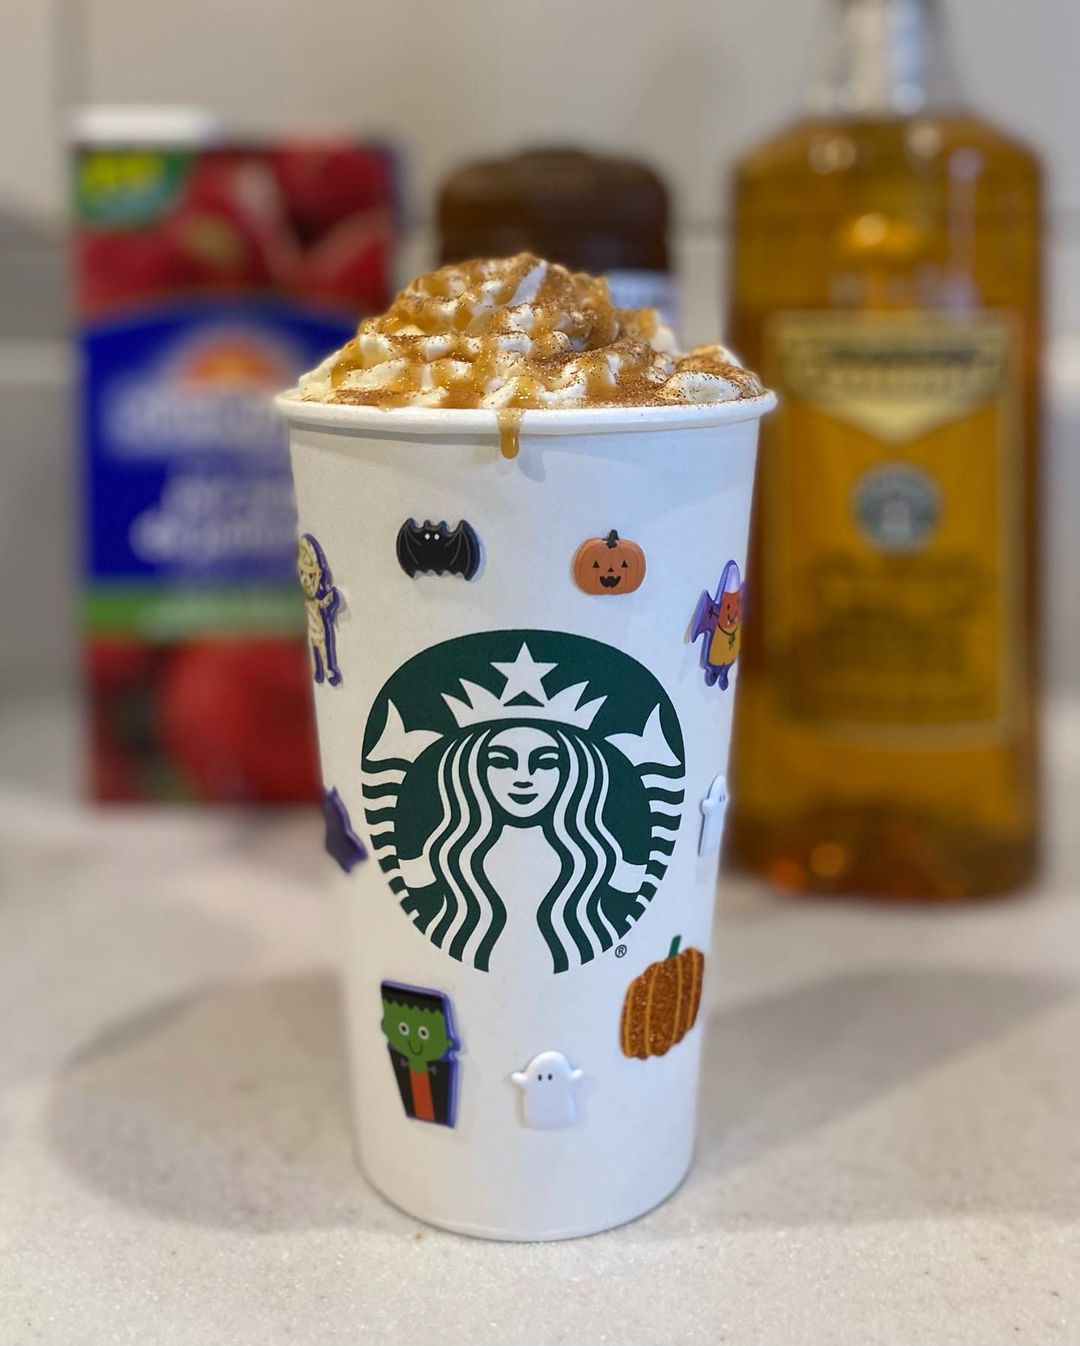 starbucks caramel apple spice drink in takeaway cup with stickers